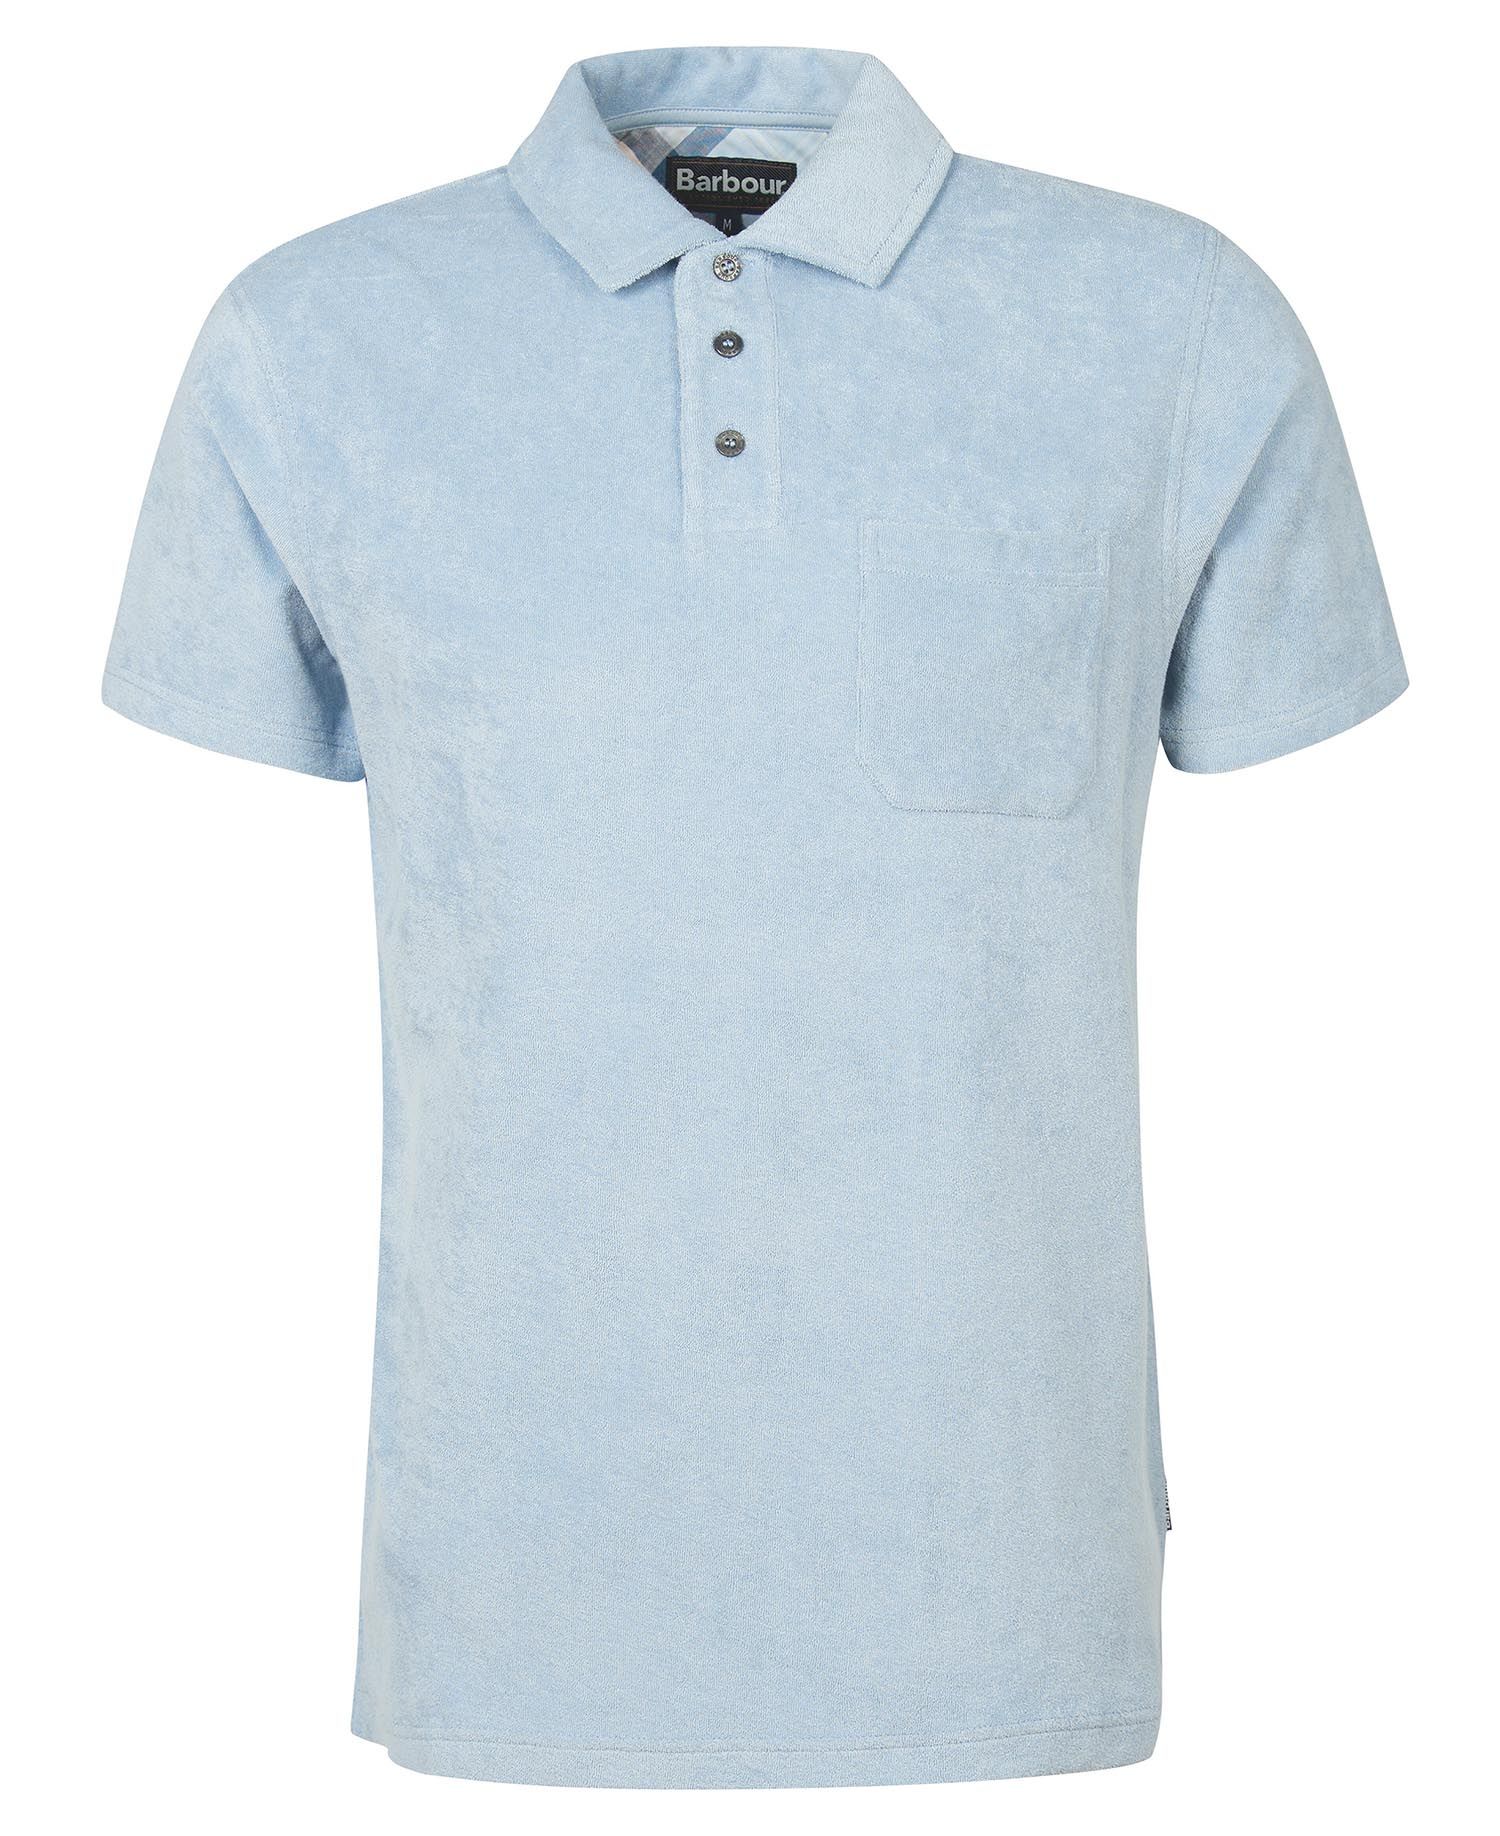 Barbour Cowes Polo Shirt